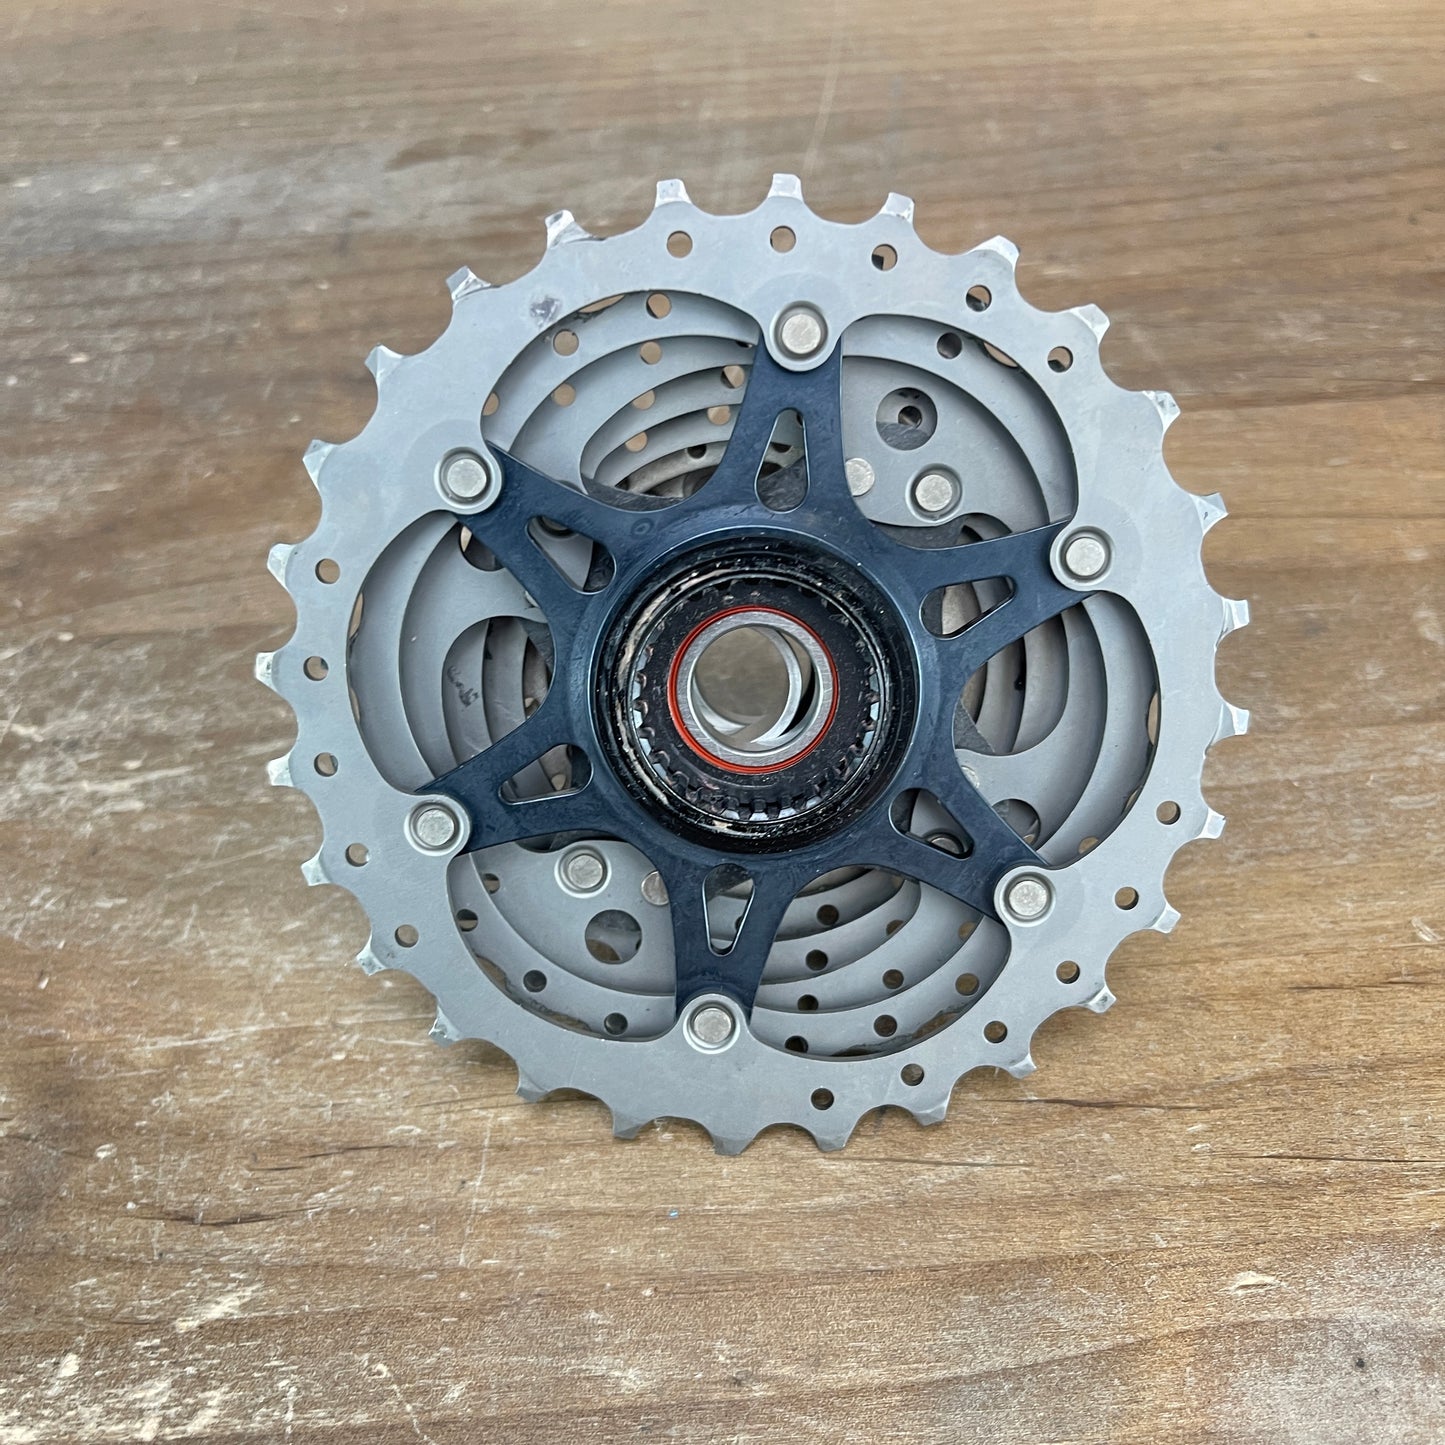 Shimano Dura Ace CS-R9100 11-28t Cassette 11-Speed "Typical Wear"